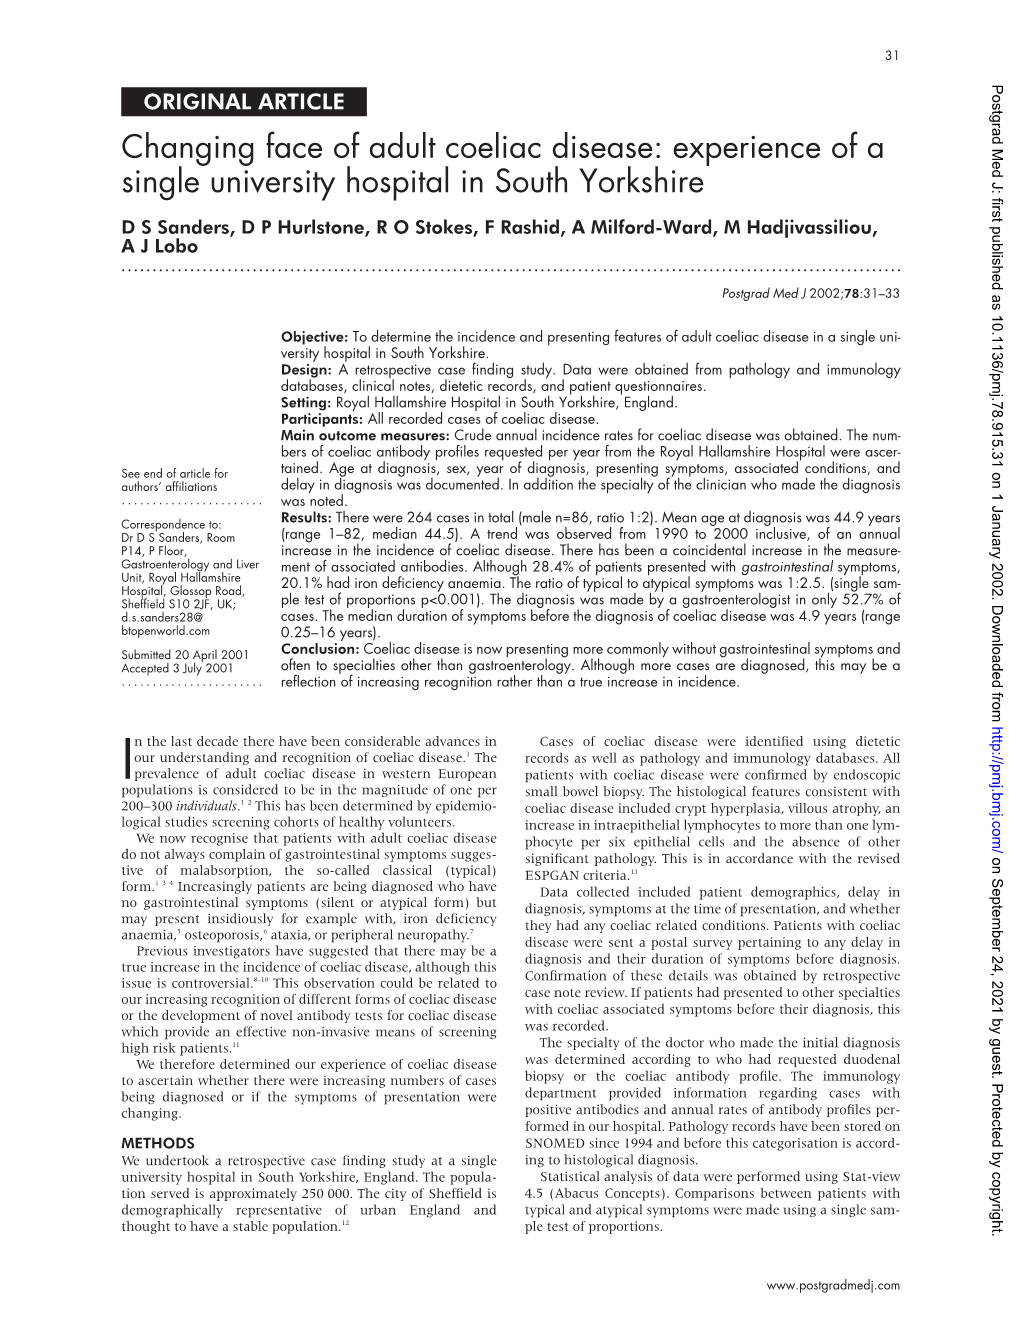 Changing Face of Adult Coeliac Disease: Experience of a Single University Hospital in South Yorkshire